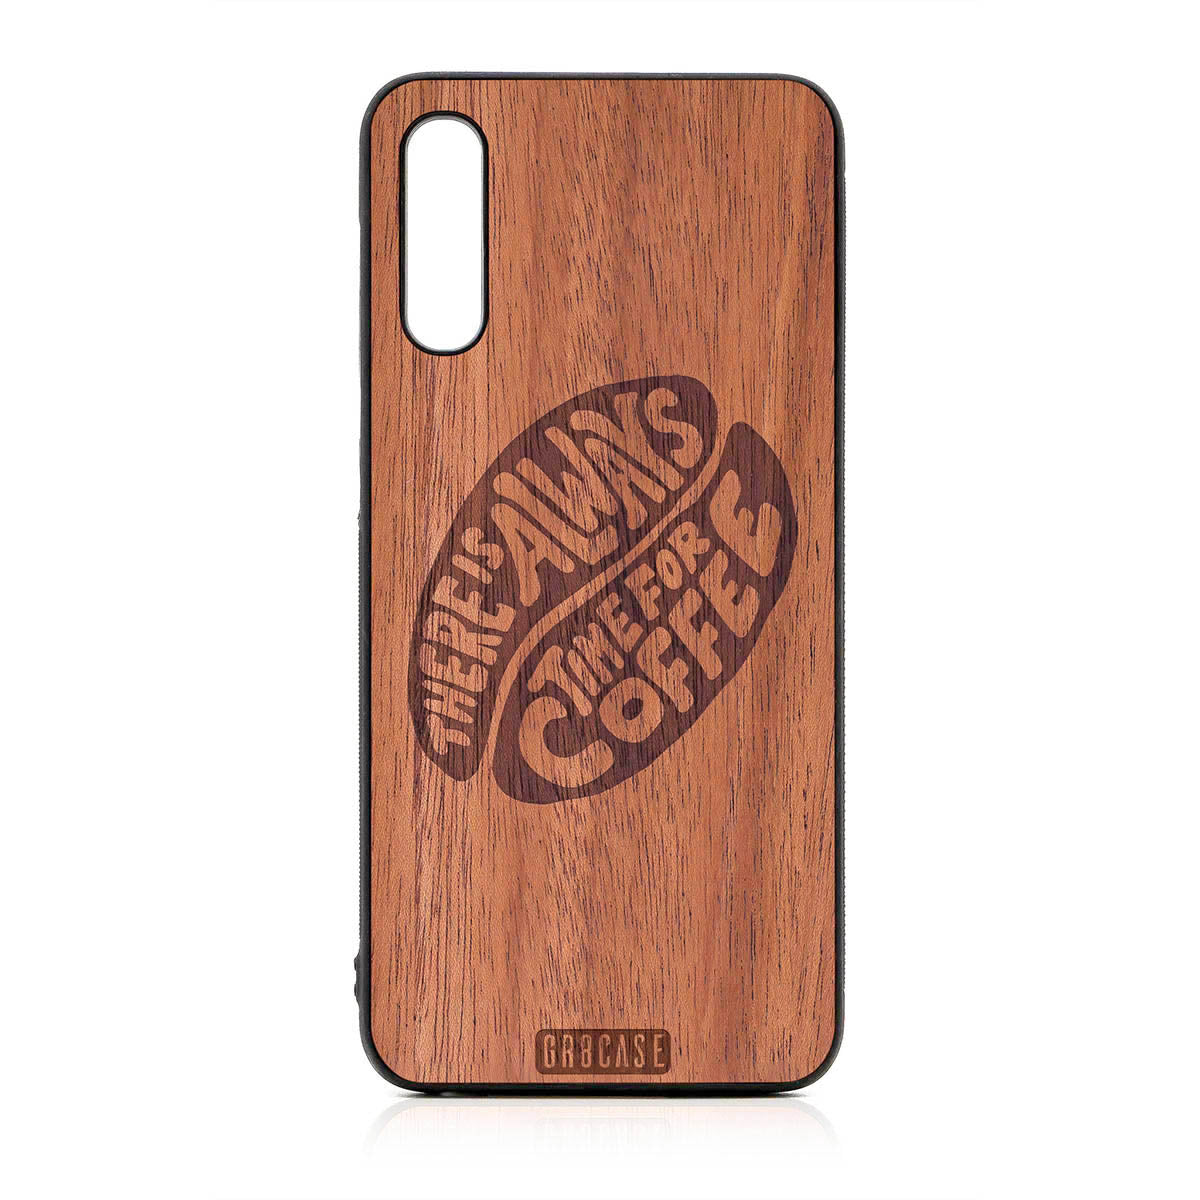 There Is Always Time For Coffee Design Wood Case For Samsung Galaxy A50